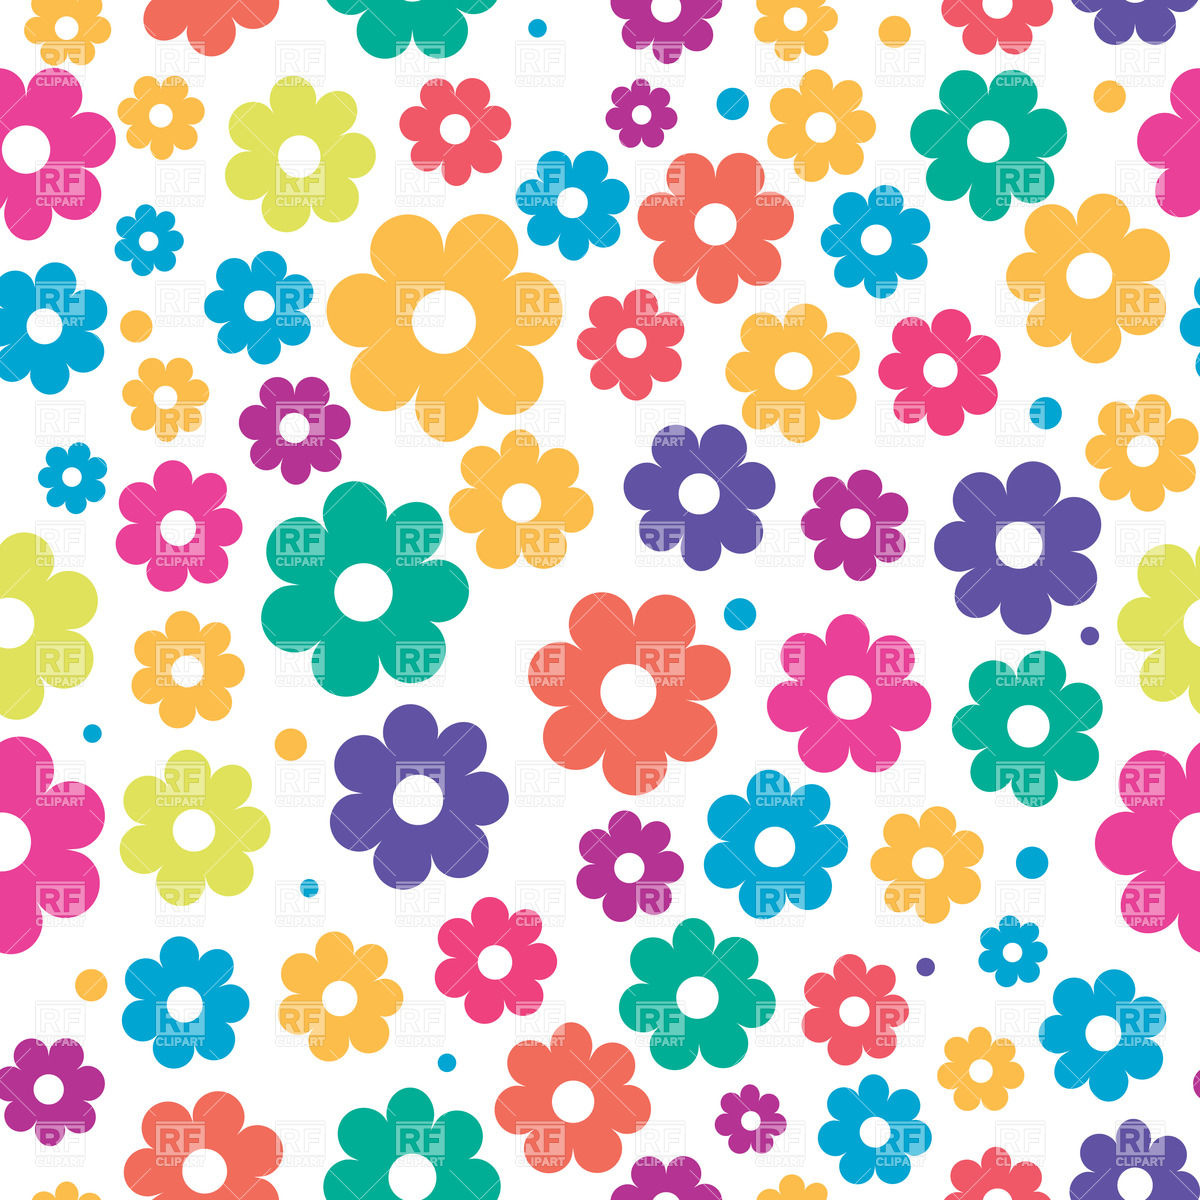 Cute Floral Seamless Background 24070 Download Royalty Free Vector